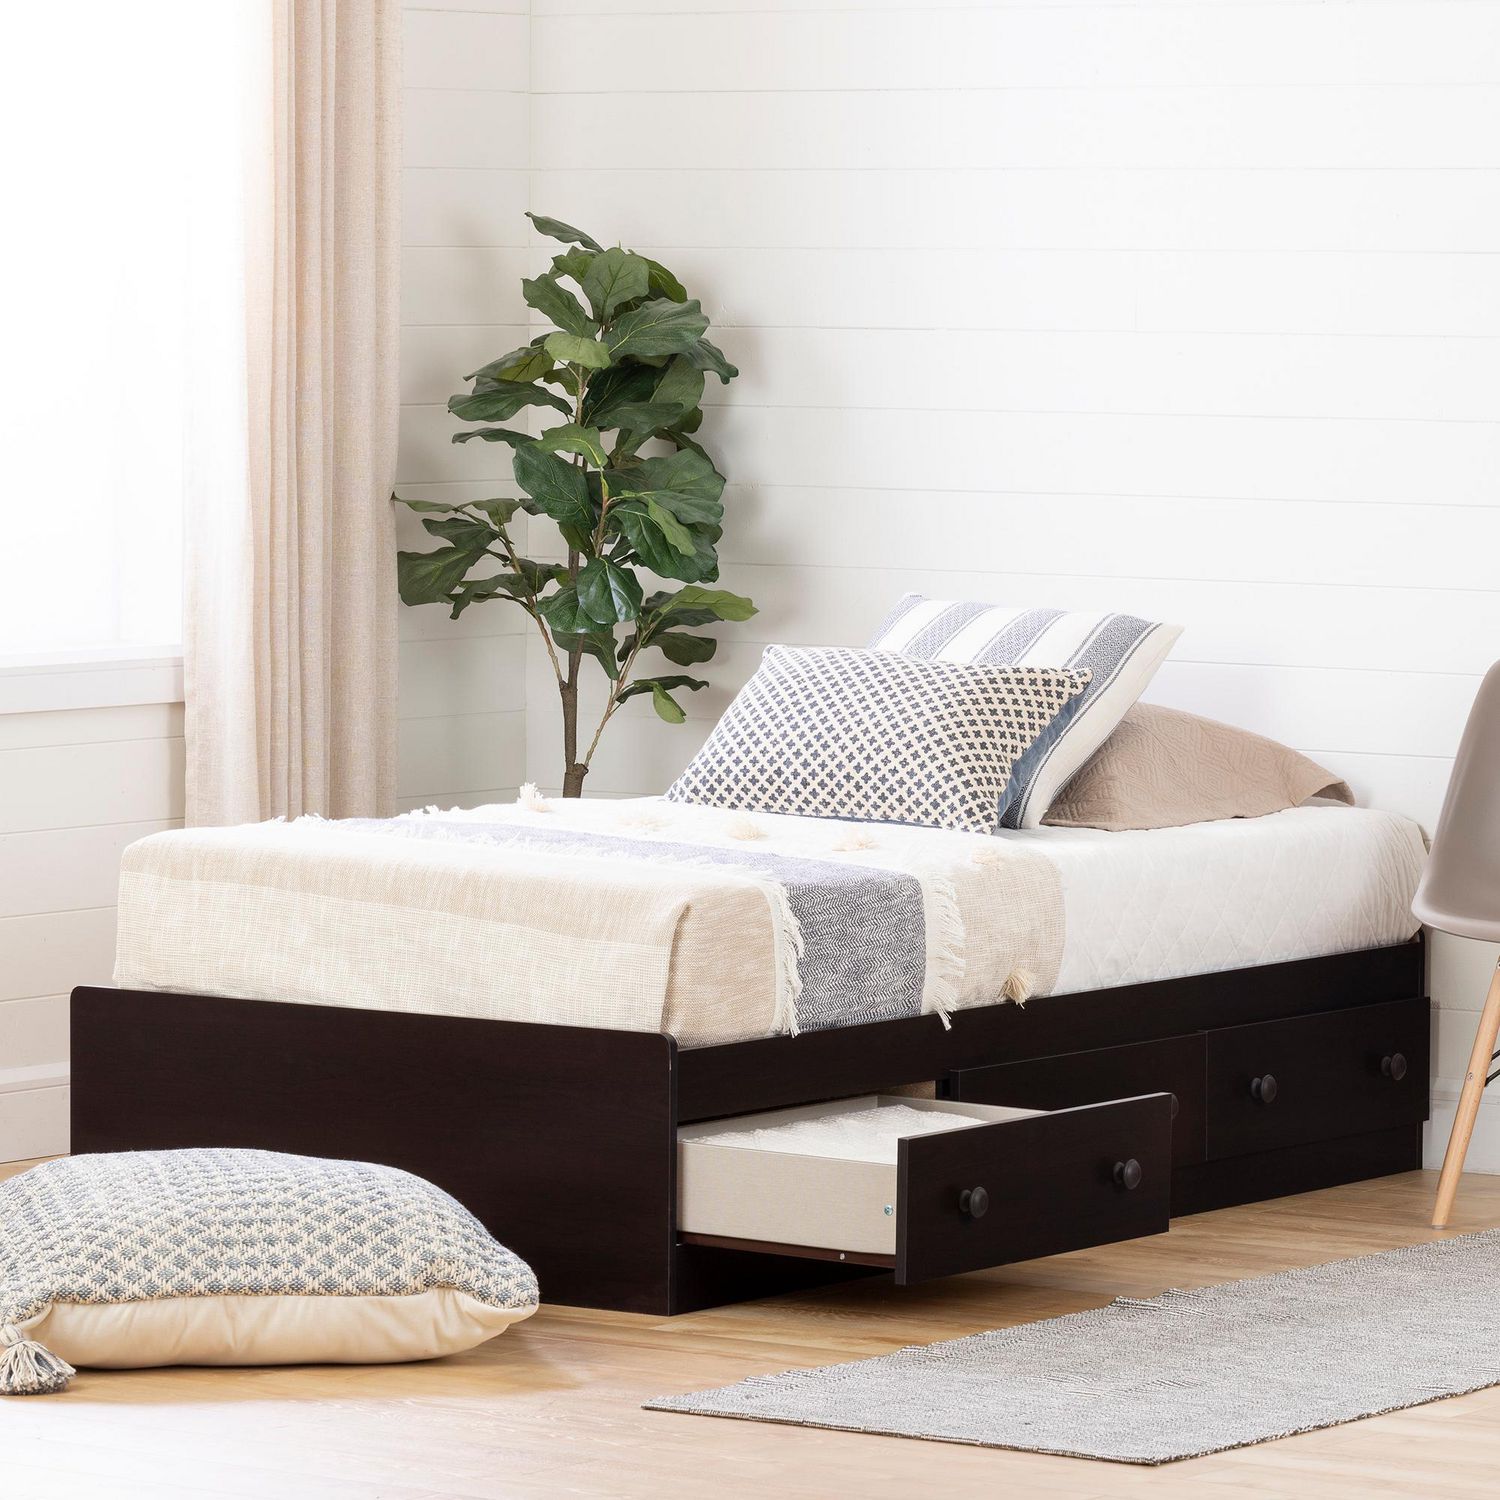 South S Summer Breeze Twin Storage, Summer Breeze Twin Mates Bed